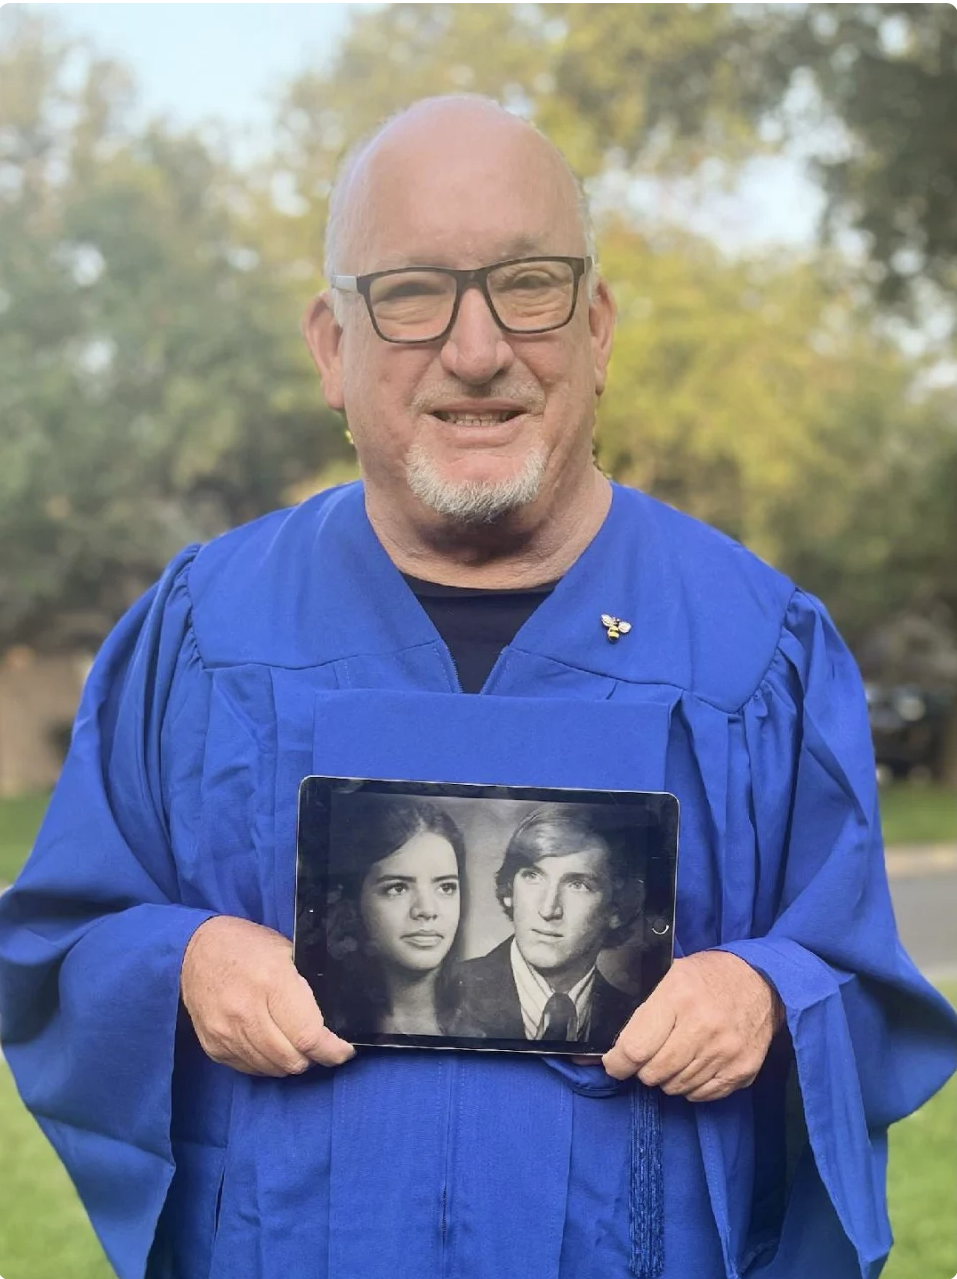 Sterling Crim is pictured with with 1974 graduation photos. Crim married his high school sweetheart, LeAnn Boyd, picture. They were married 47 years. (Credit: The Oklahoman)